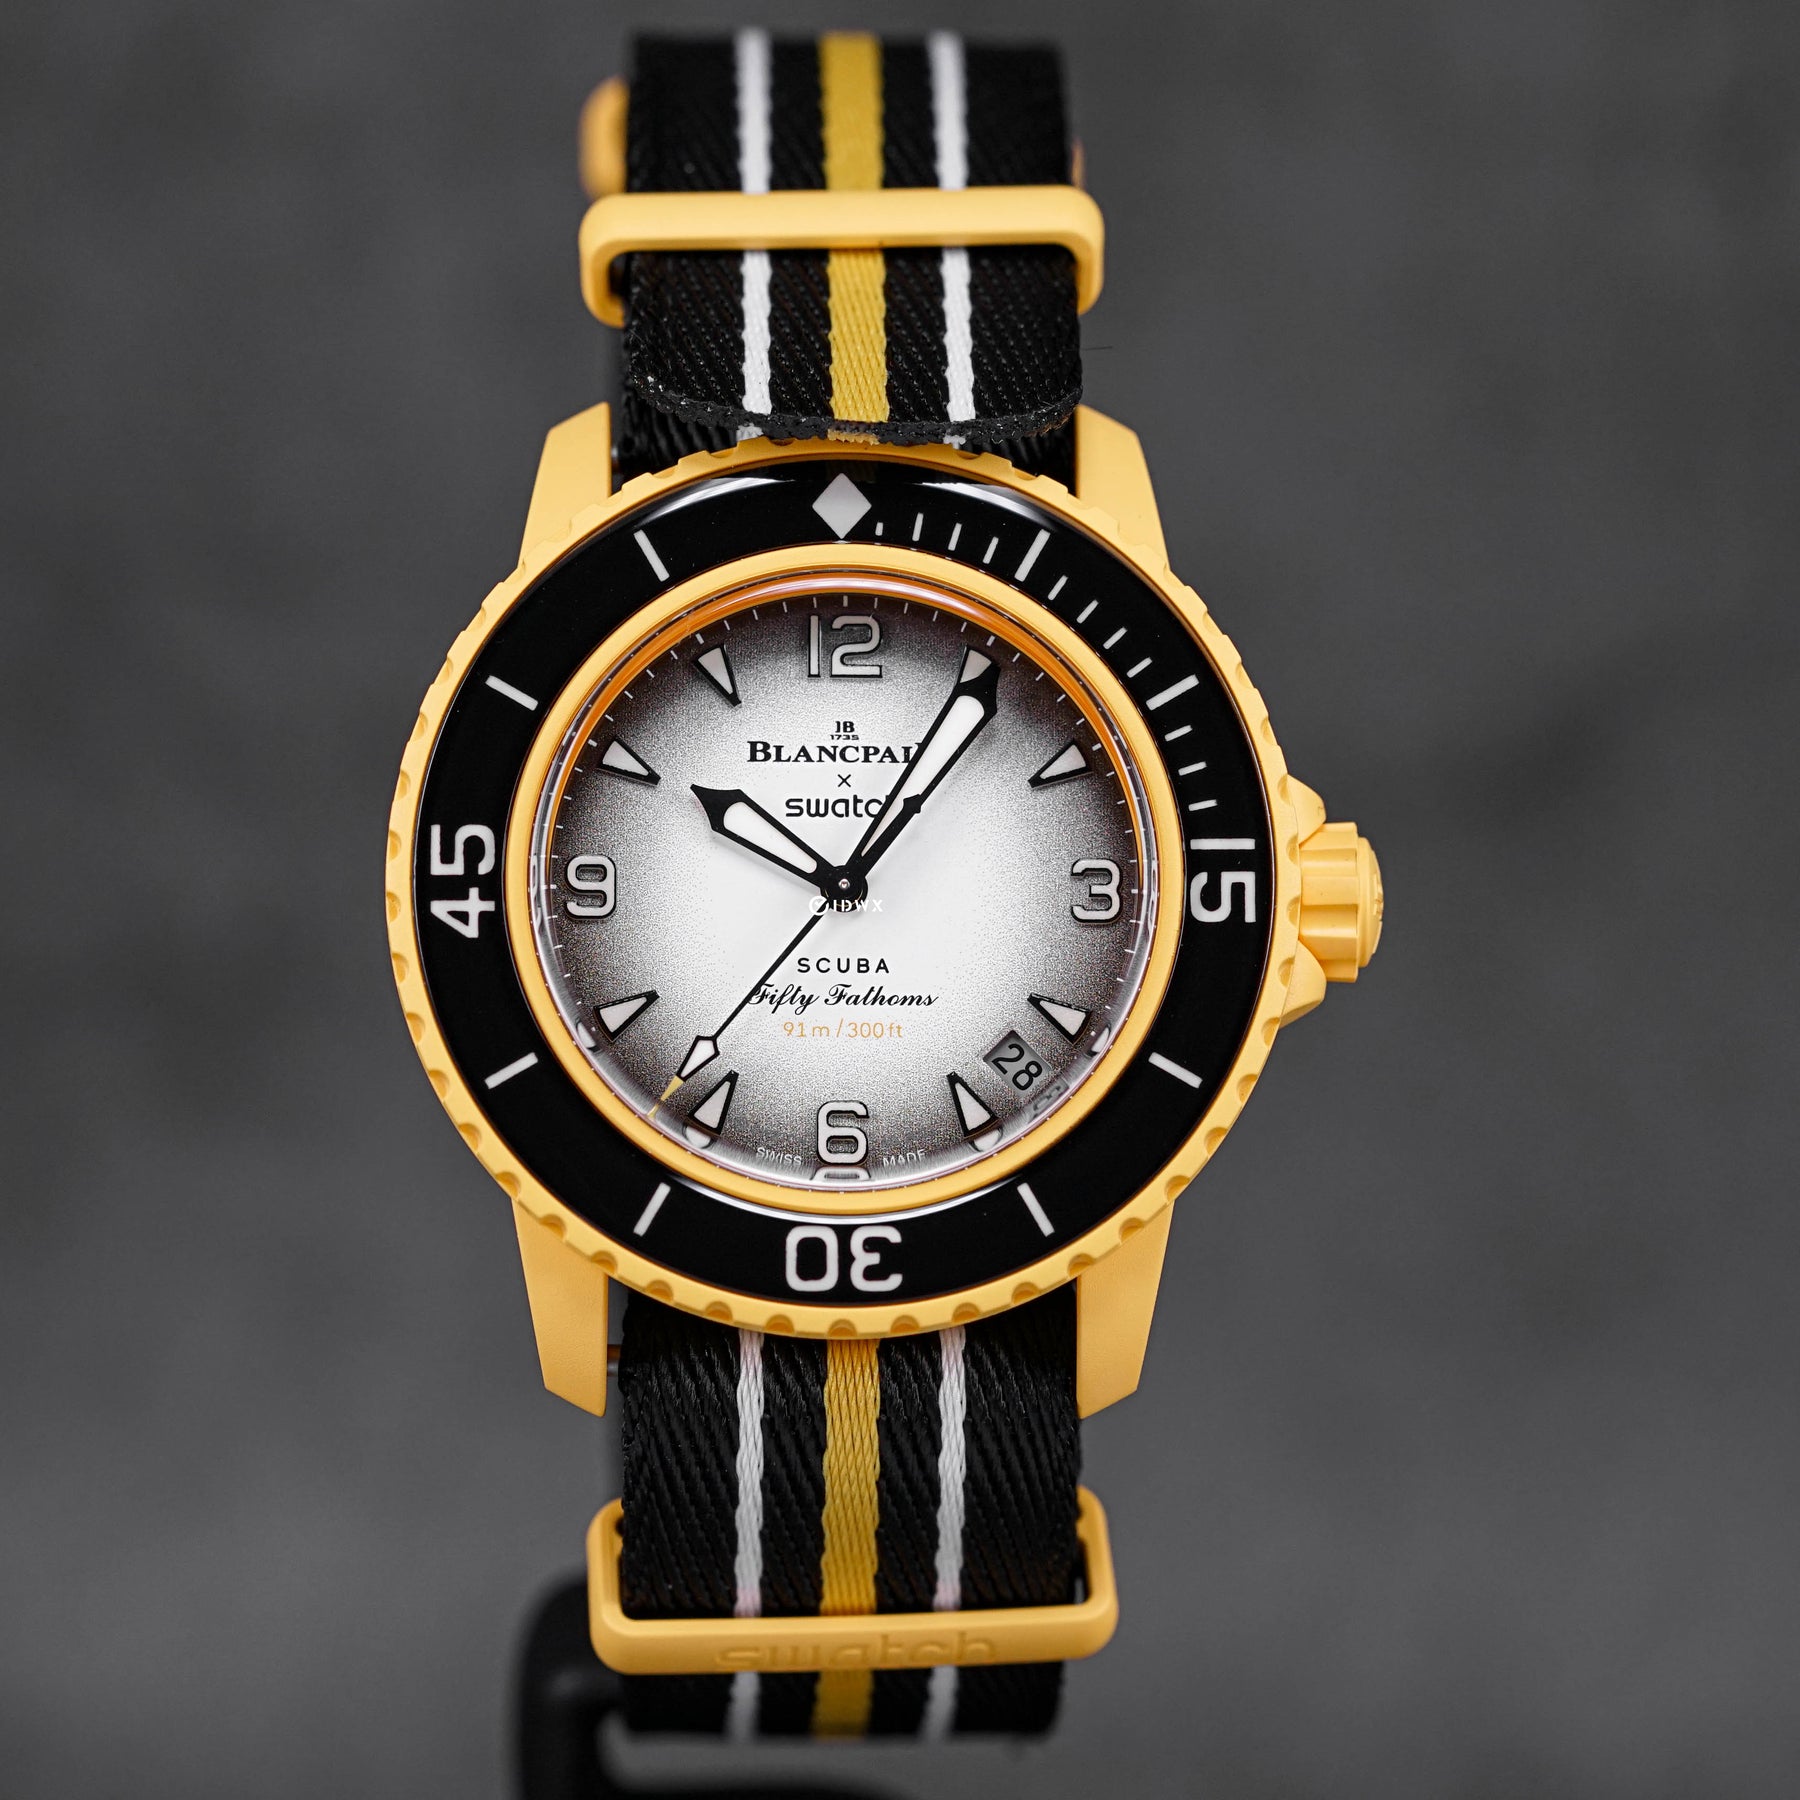 BLANCPAIN X SWATCH PACIFIC